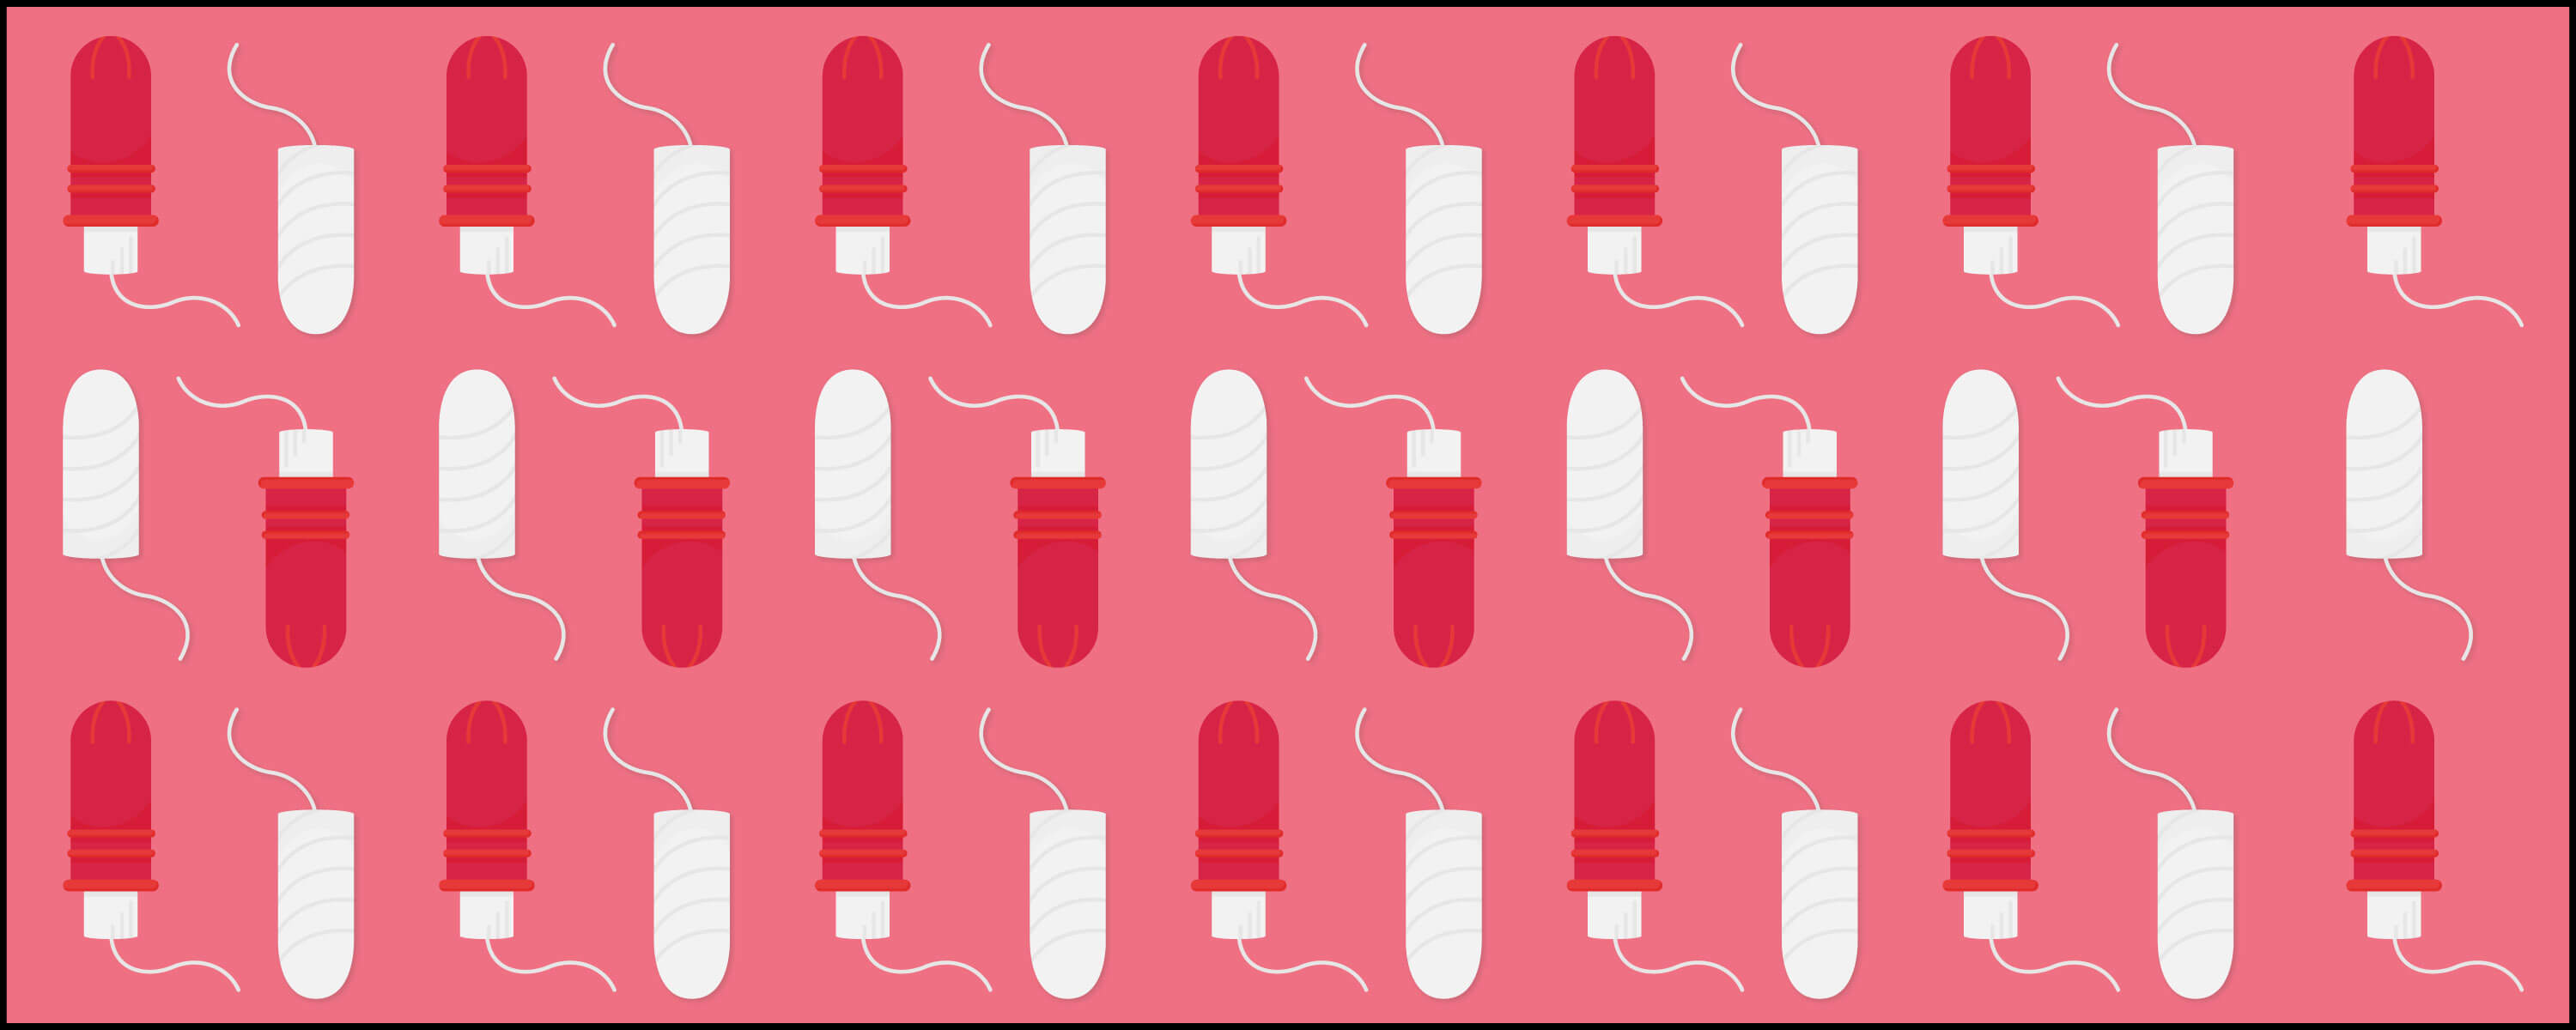 Tampons are menstrual products that are inserted internally into the vagina during your periods to absorb blood and vaginal fluids